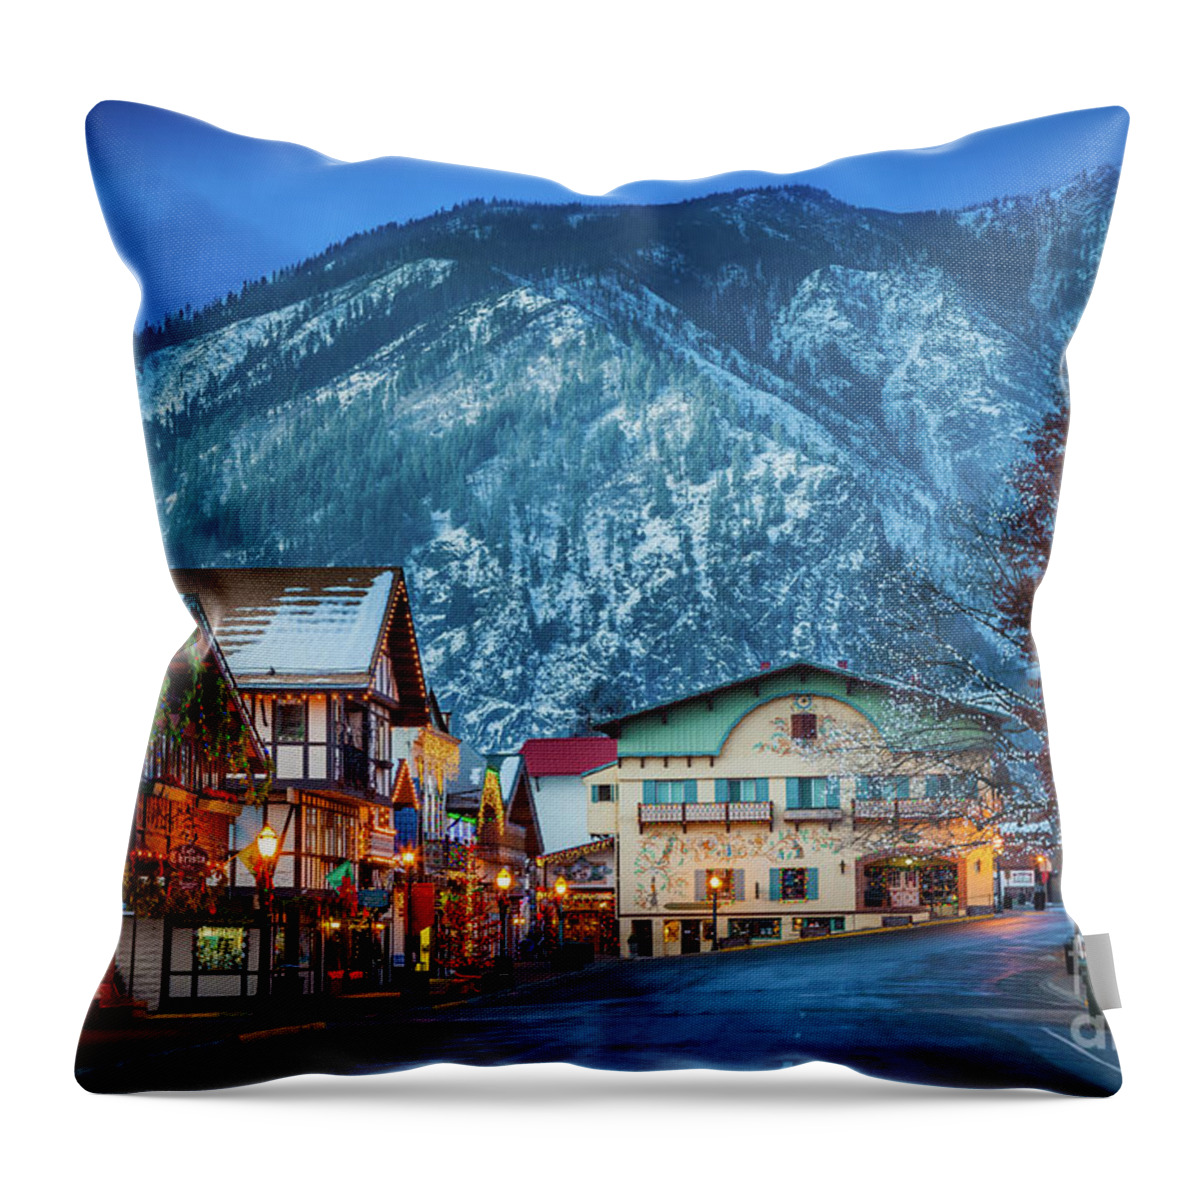 America Throw Pillow featuring the photograph Leavenworth Alpine View by Inge Johnsson